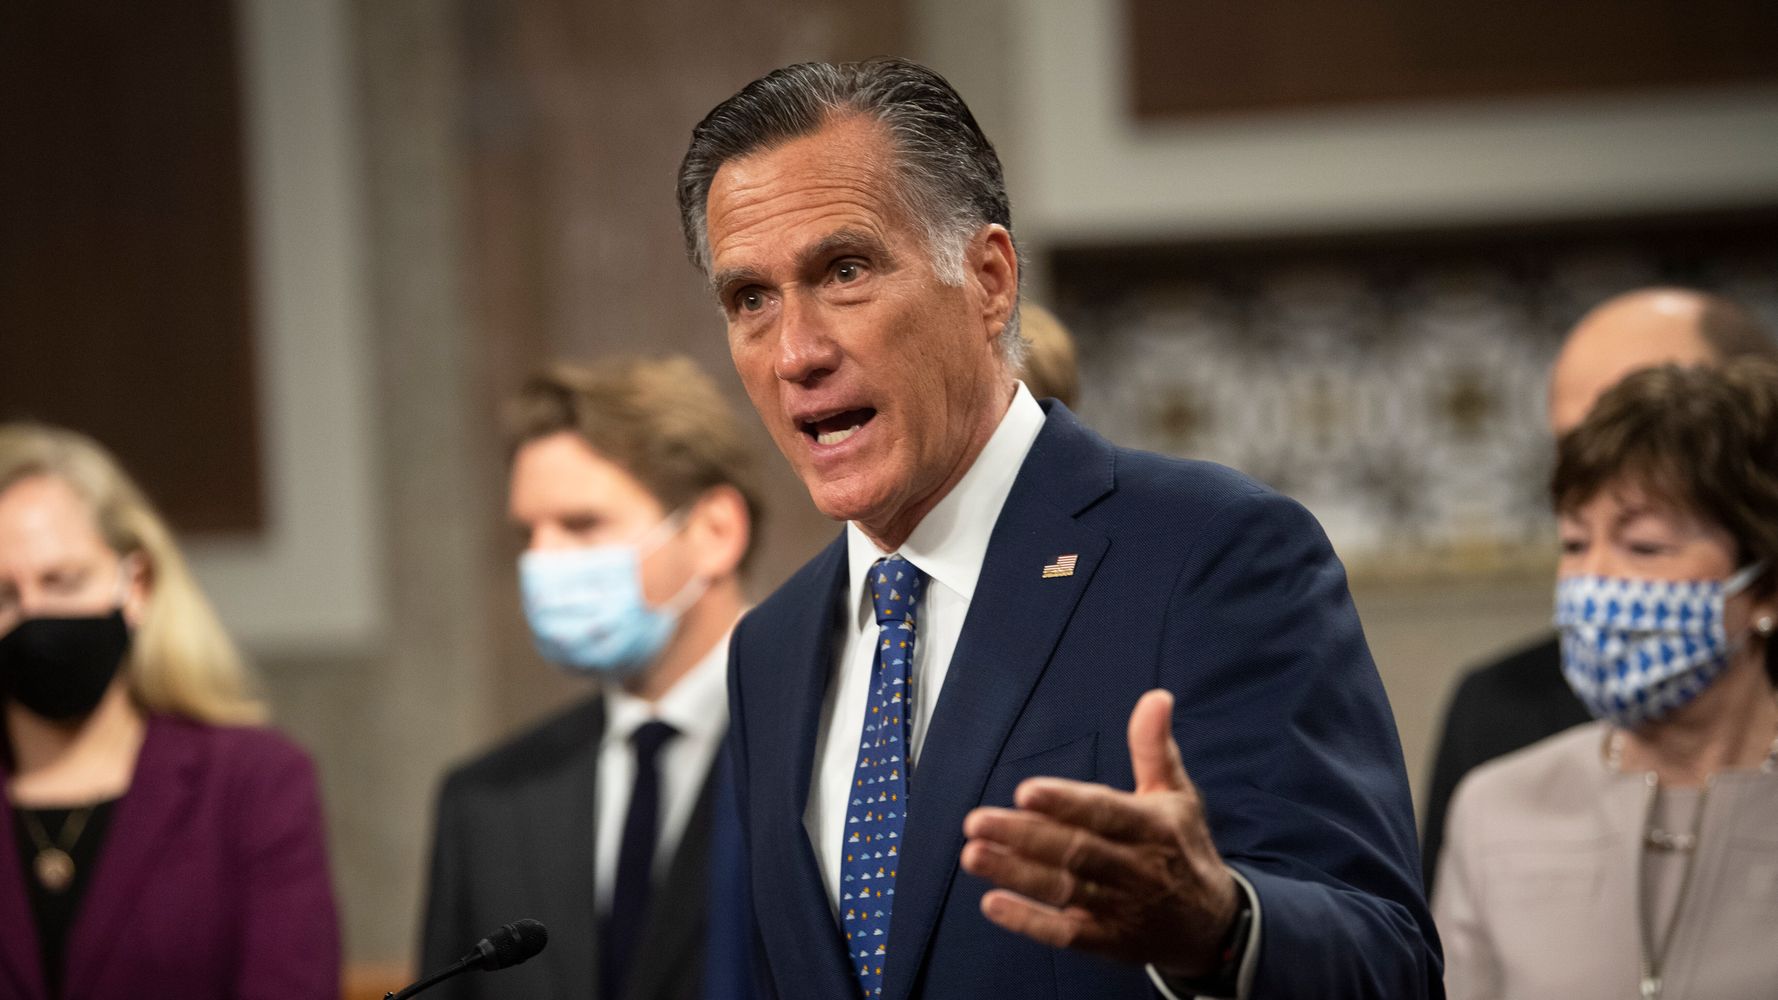 Mitt Romney Succinctly Sums Up Need For COVID-19 Relief: ‘This Is A Crisis’